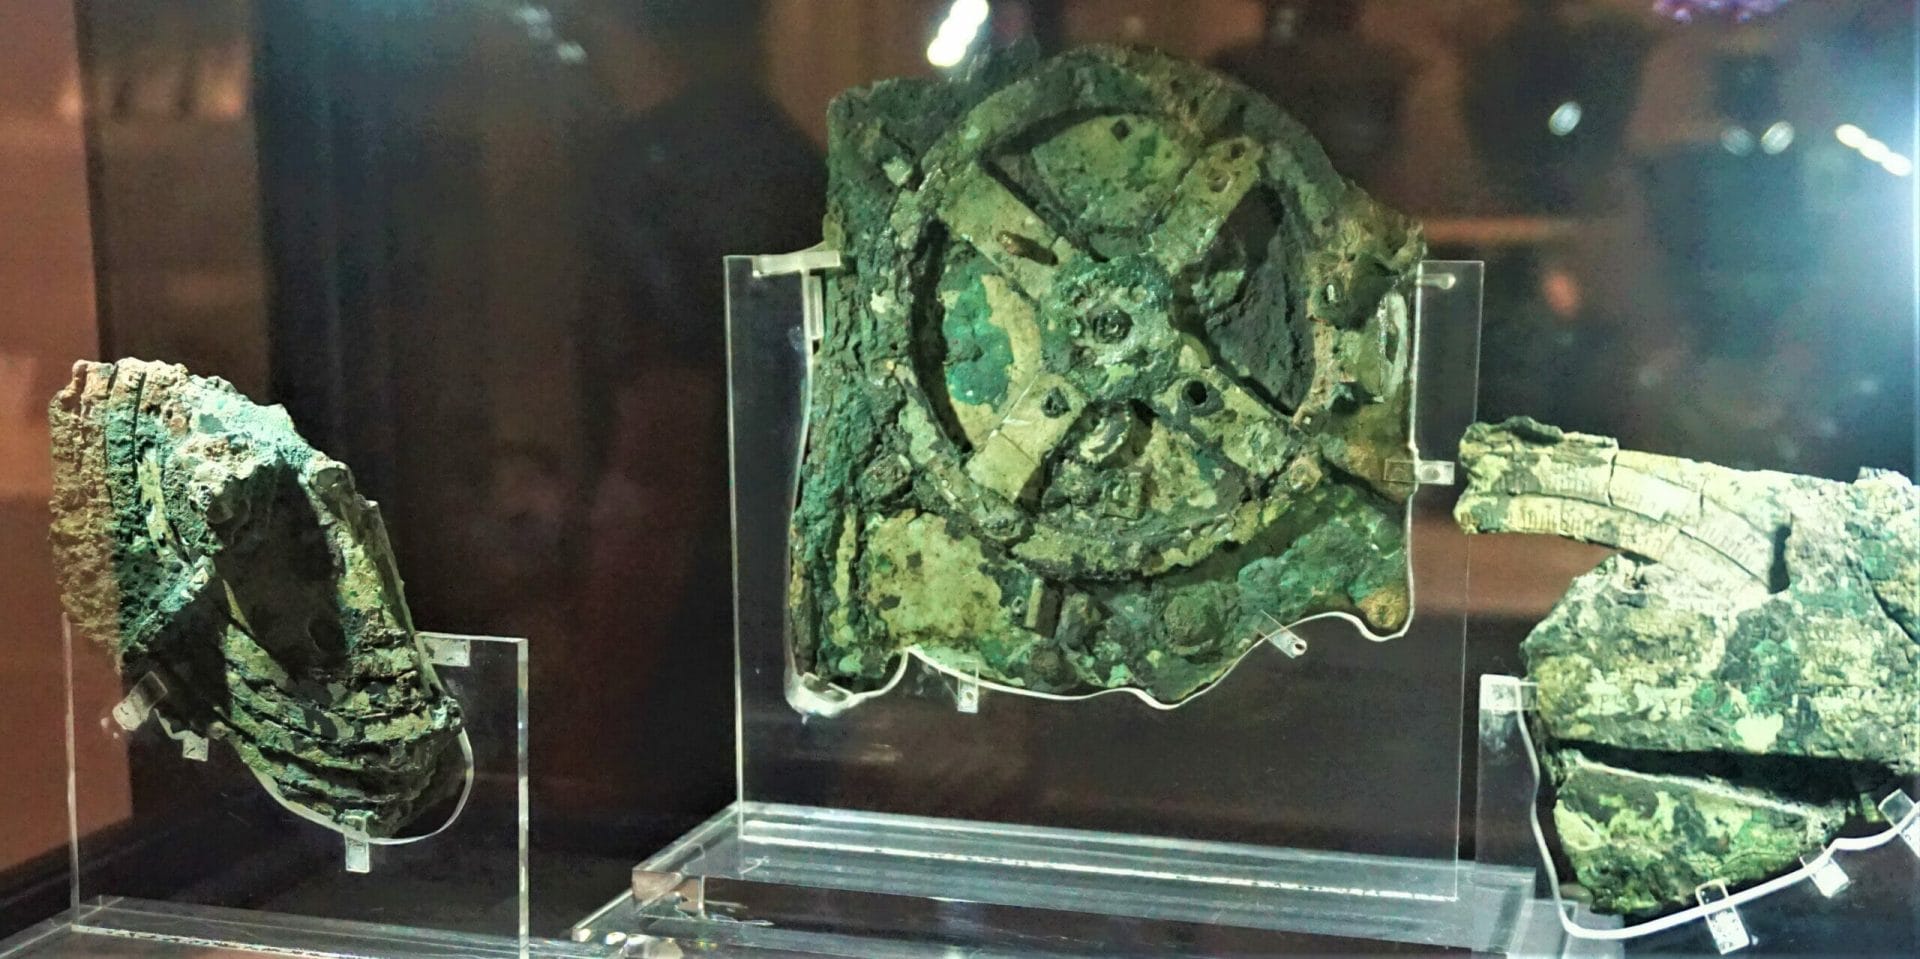 Antikythera_Mechanism_-_National_Archaeological_Museum,_Athens_by_Joy_of_Museum